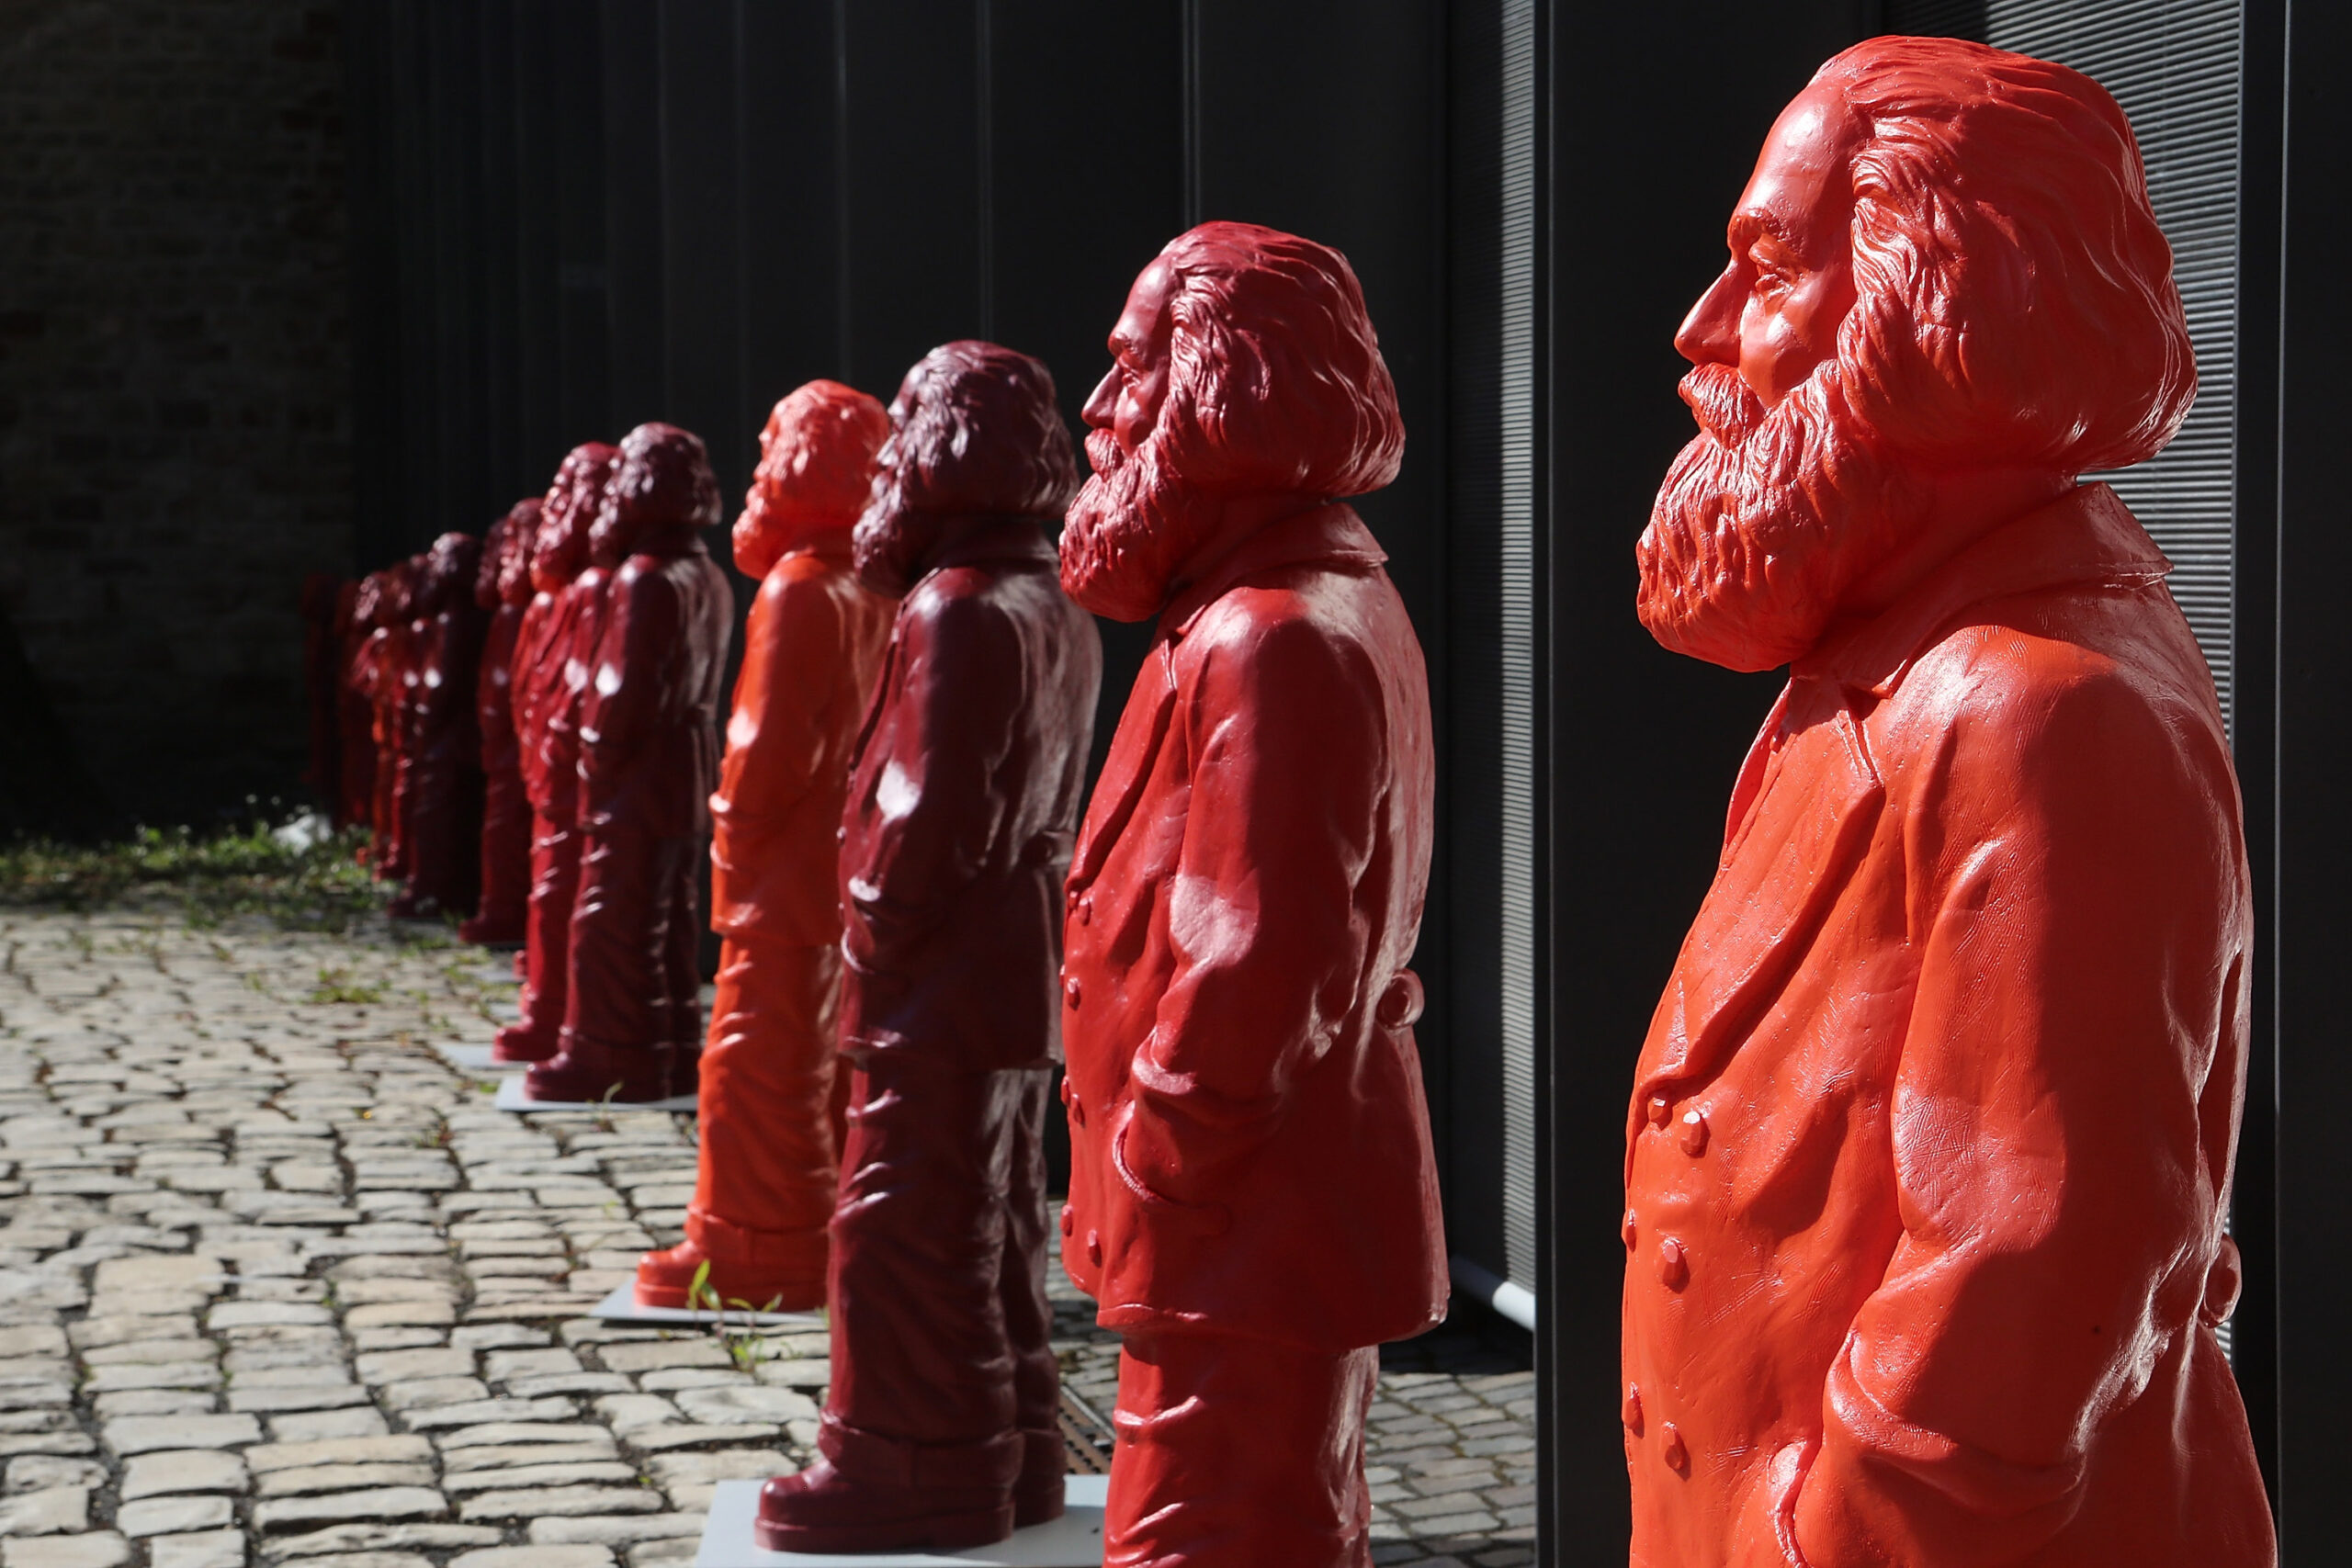 Some of the 500, one-meter-tall statues of Karl Marx on display in Trier, Germany, May 2013 (Hannelore Foerster/Getty Images)